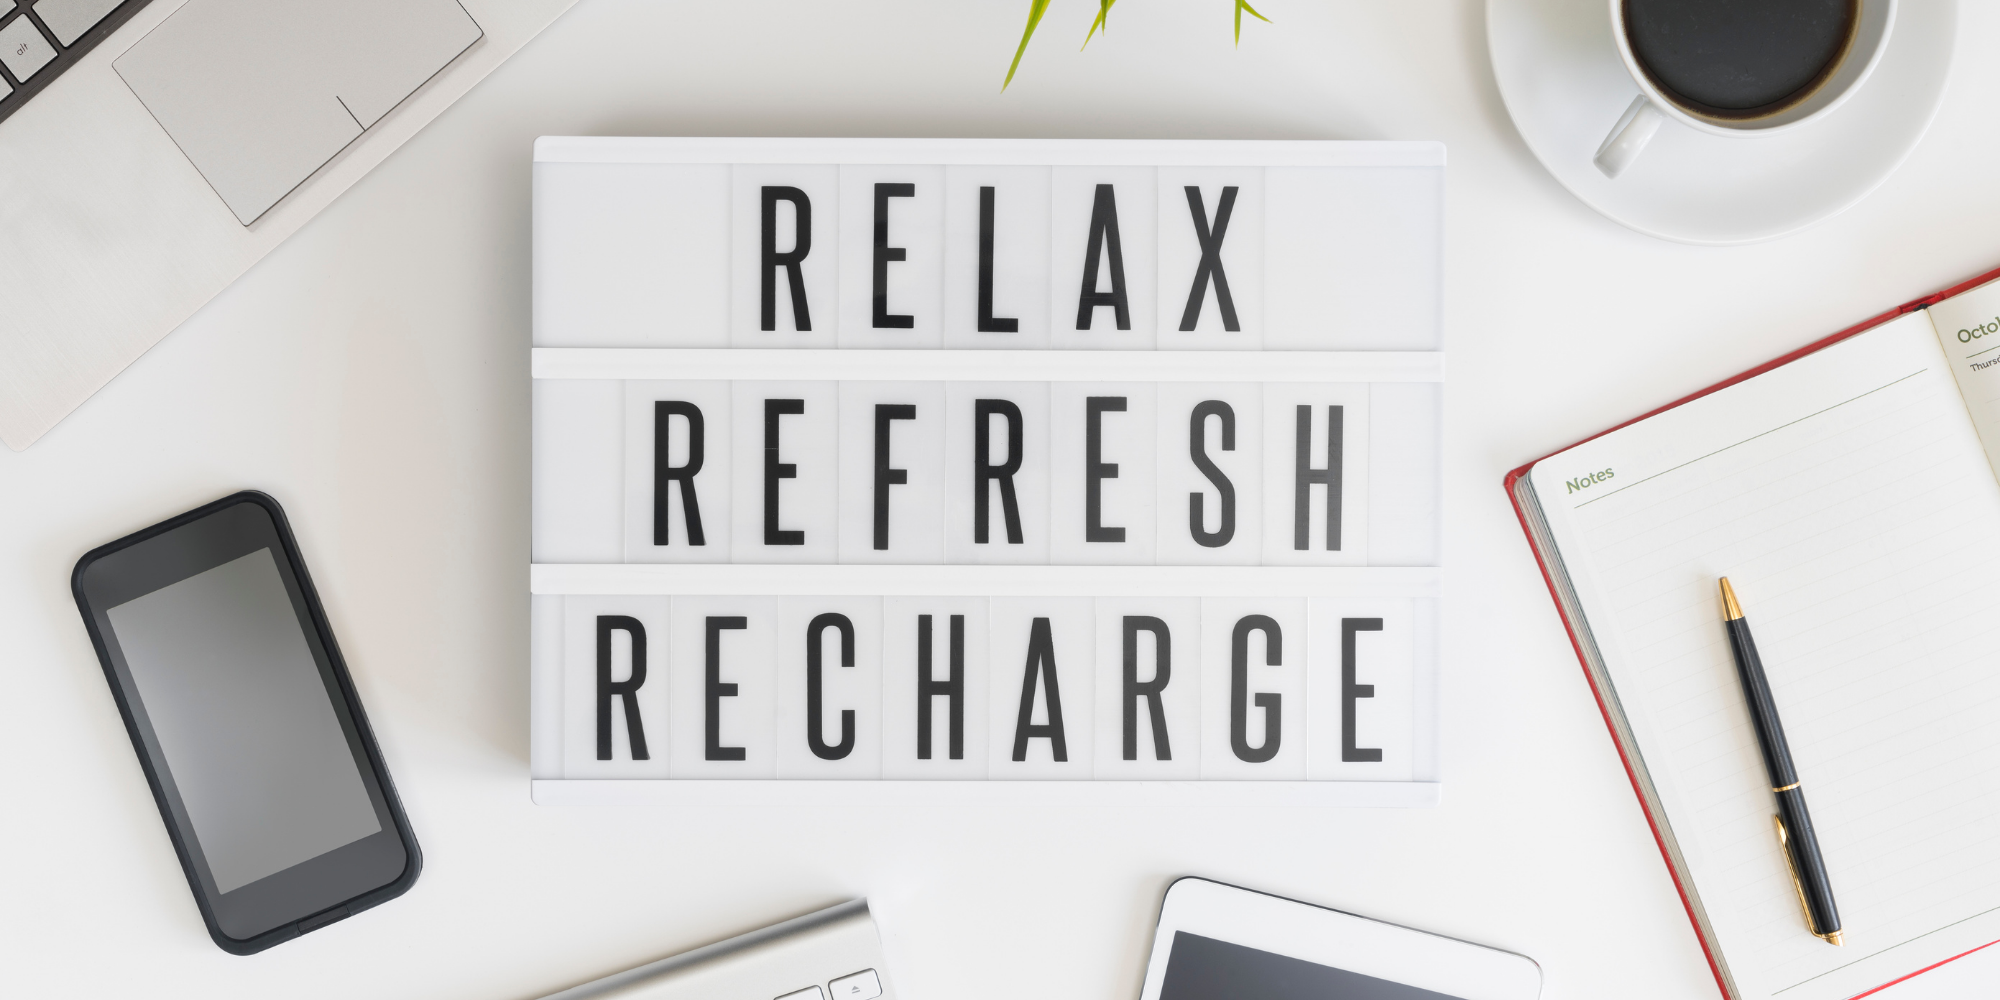 Relax, refresh, recharge